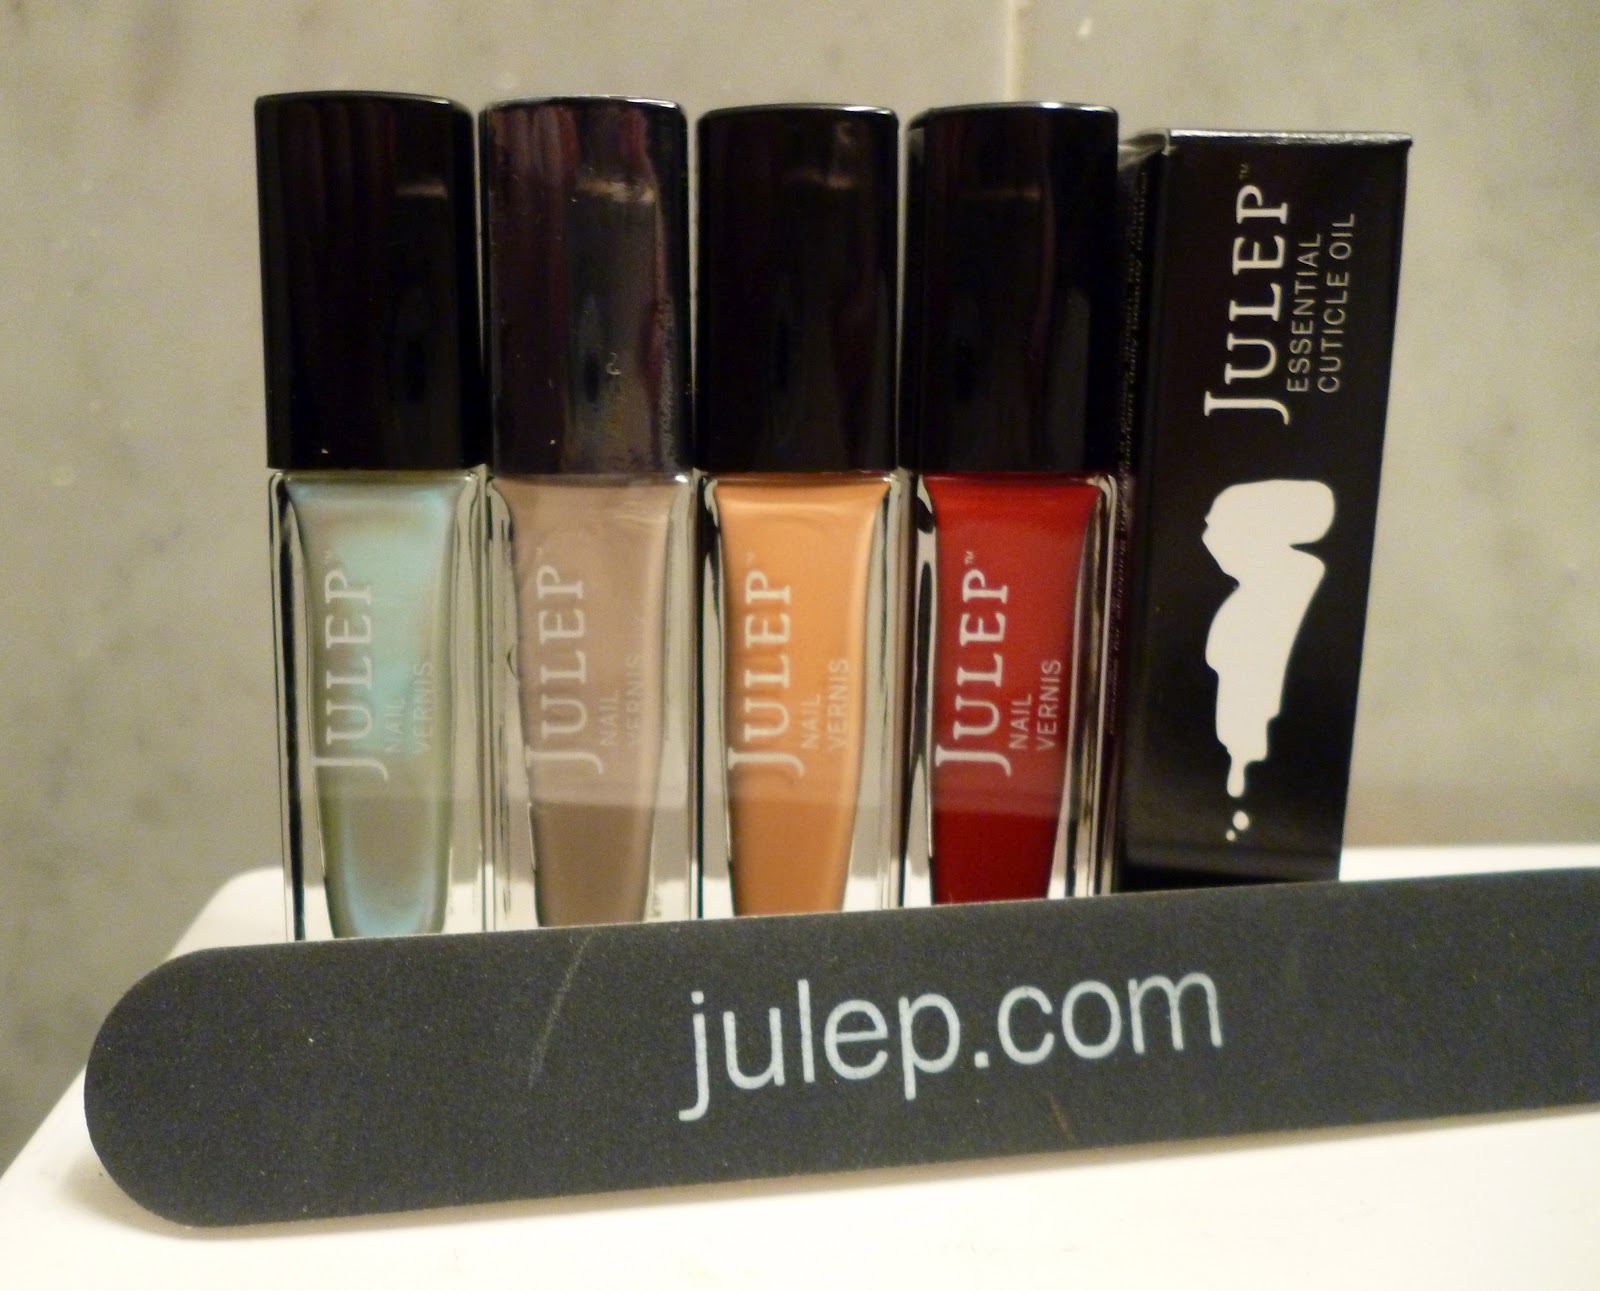 After voting on Facebook, Julep offered an April mystery box!